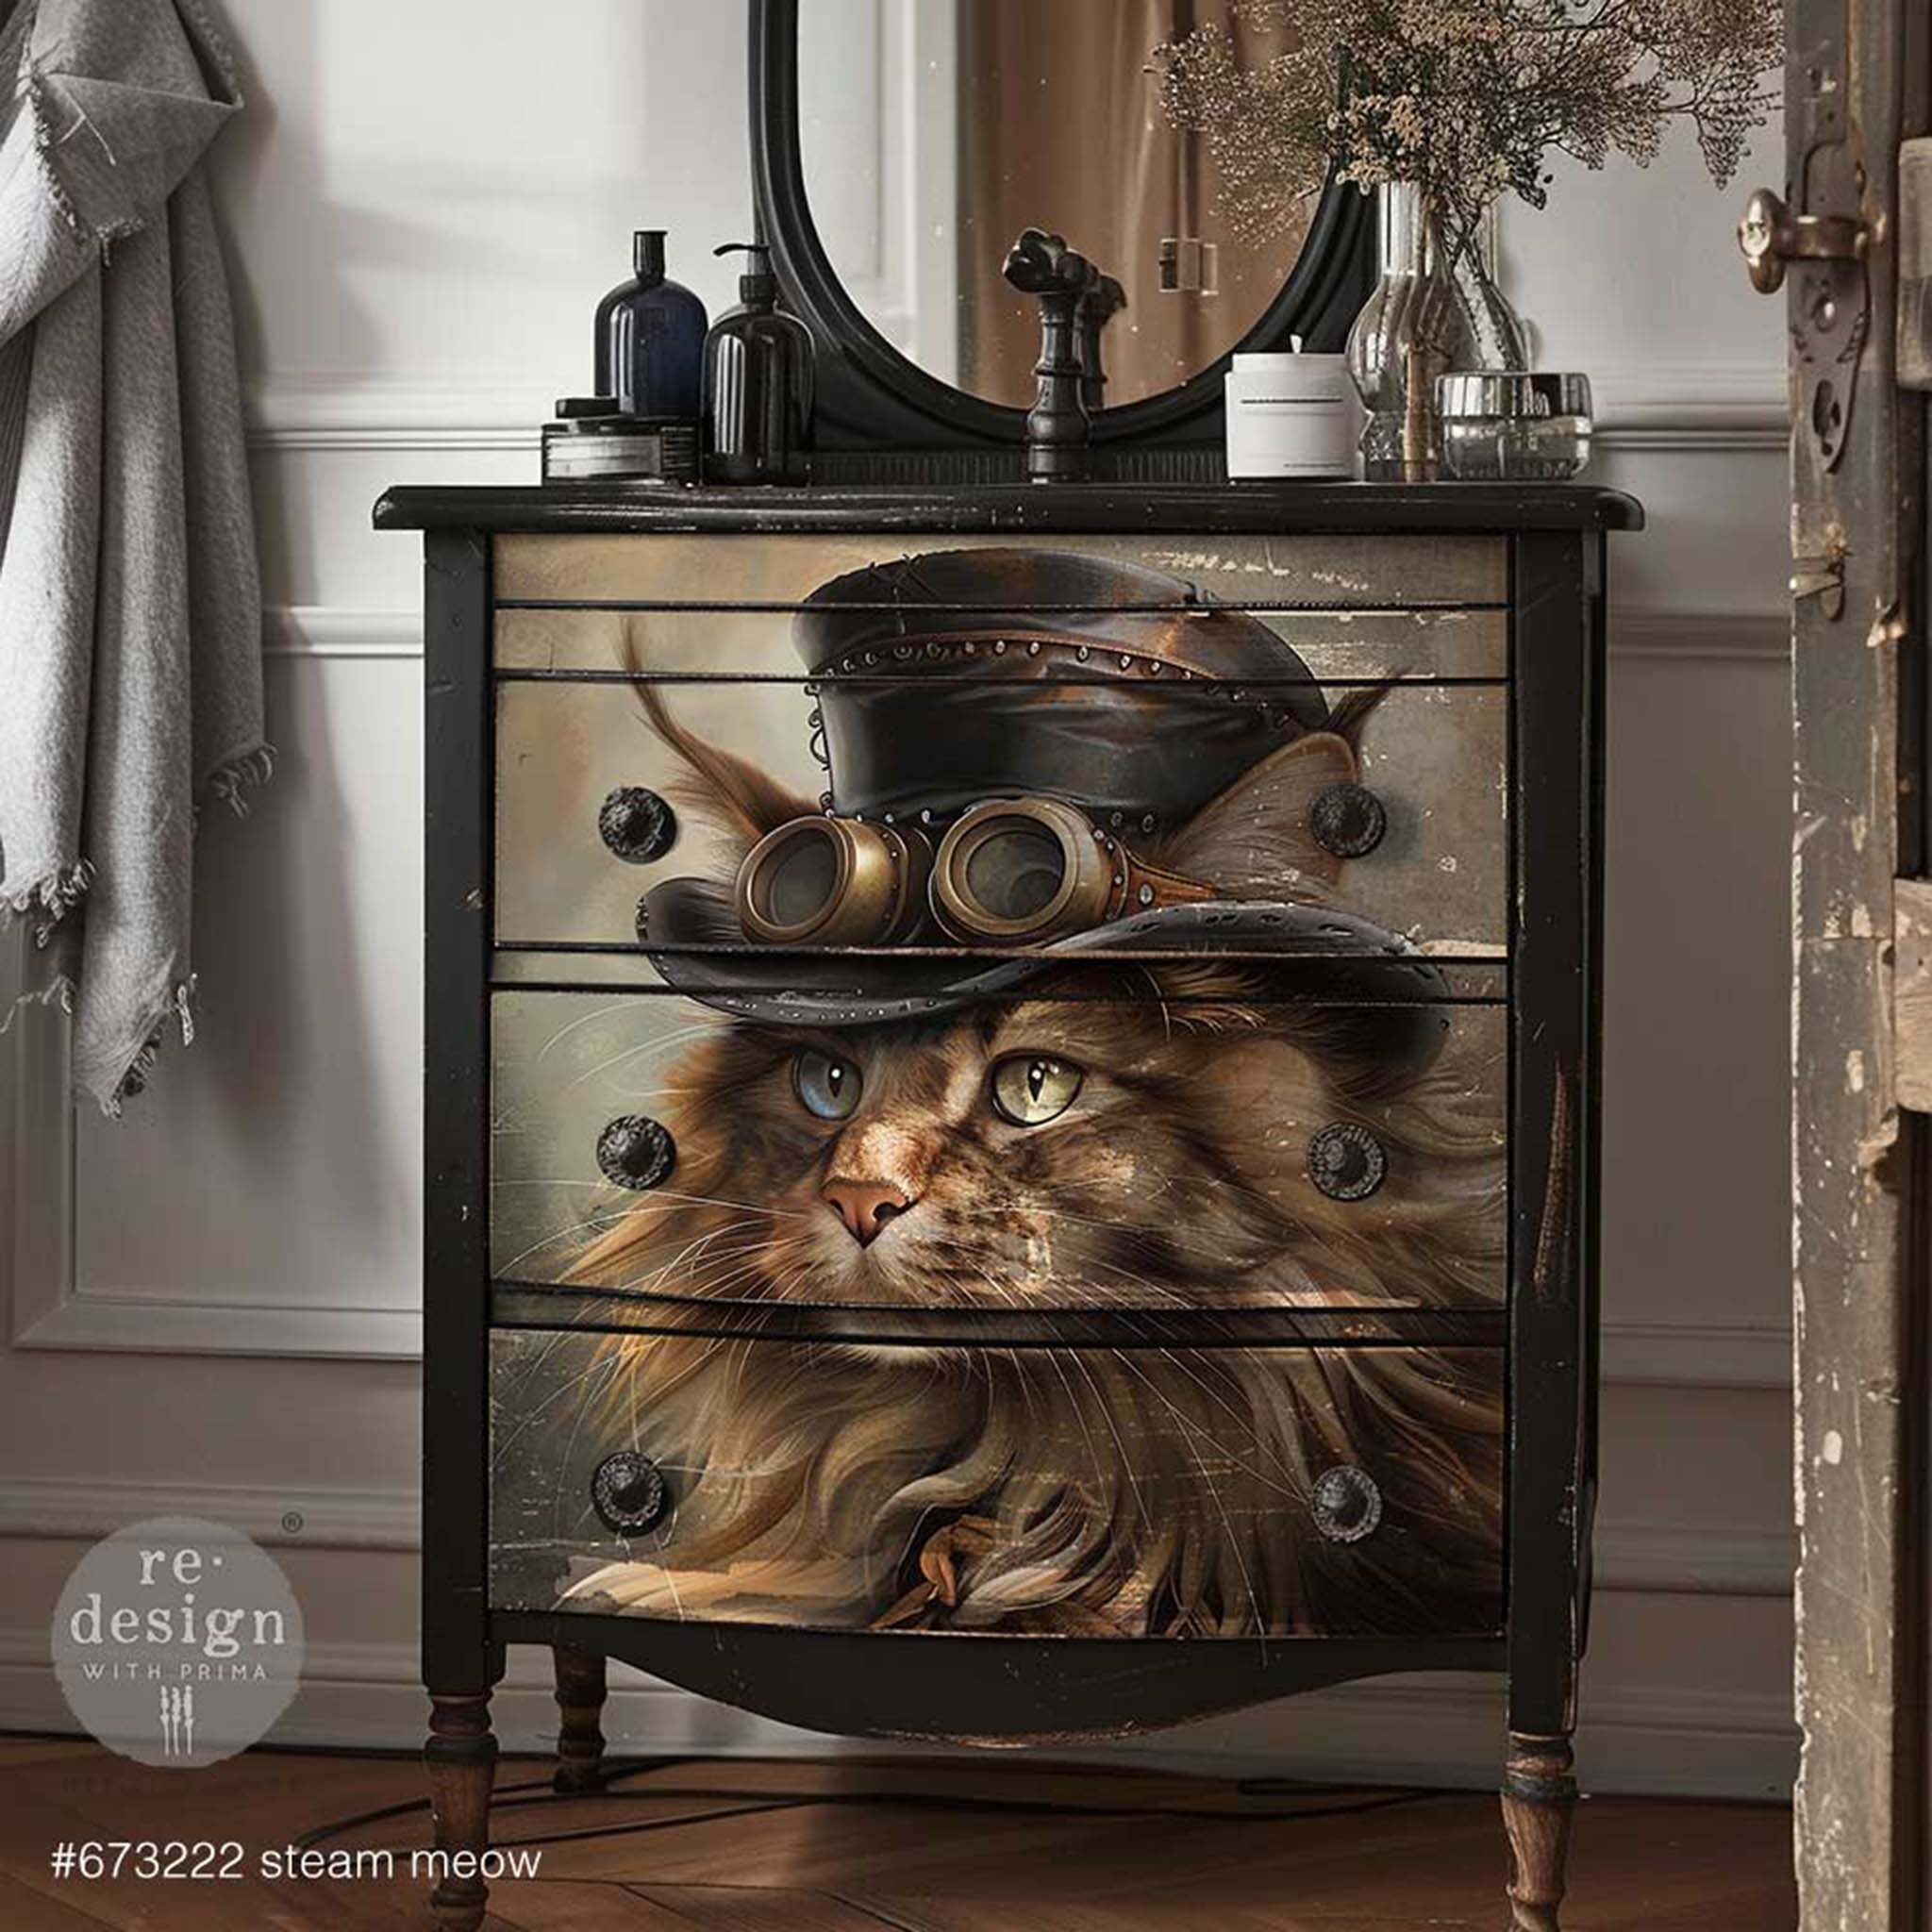 A vintage 3-drawer dresser is painted black and features ReDesign with Prima's Steam Meow A1 fiber paper on the drawers.